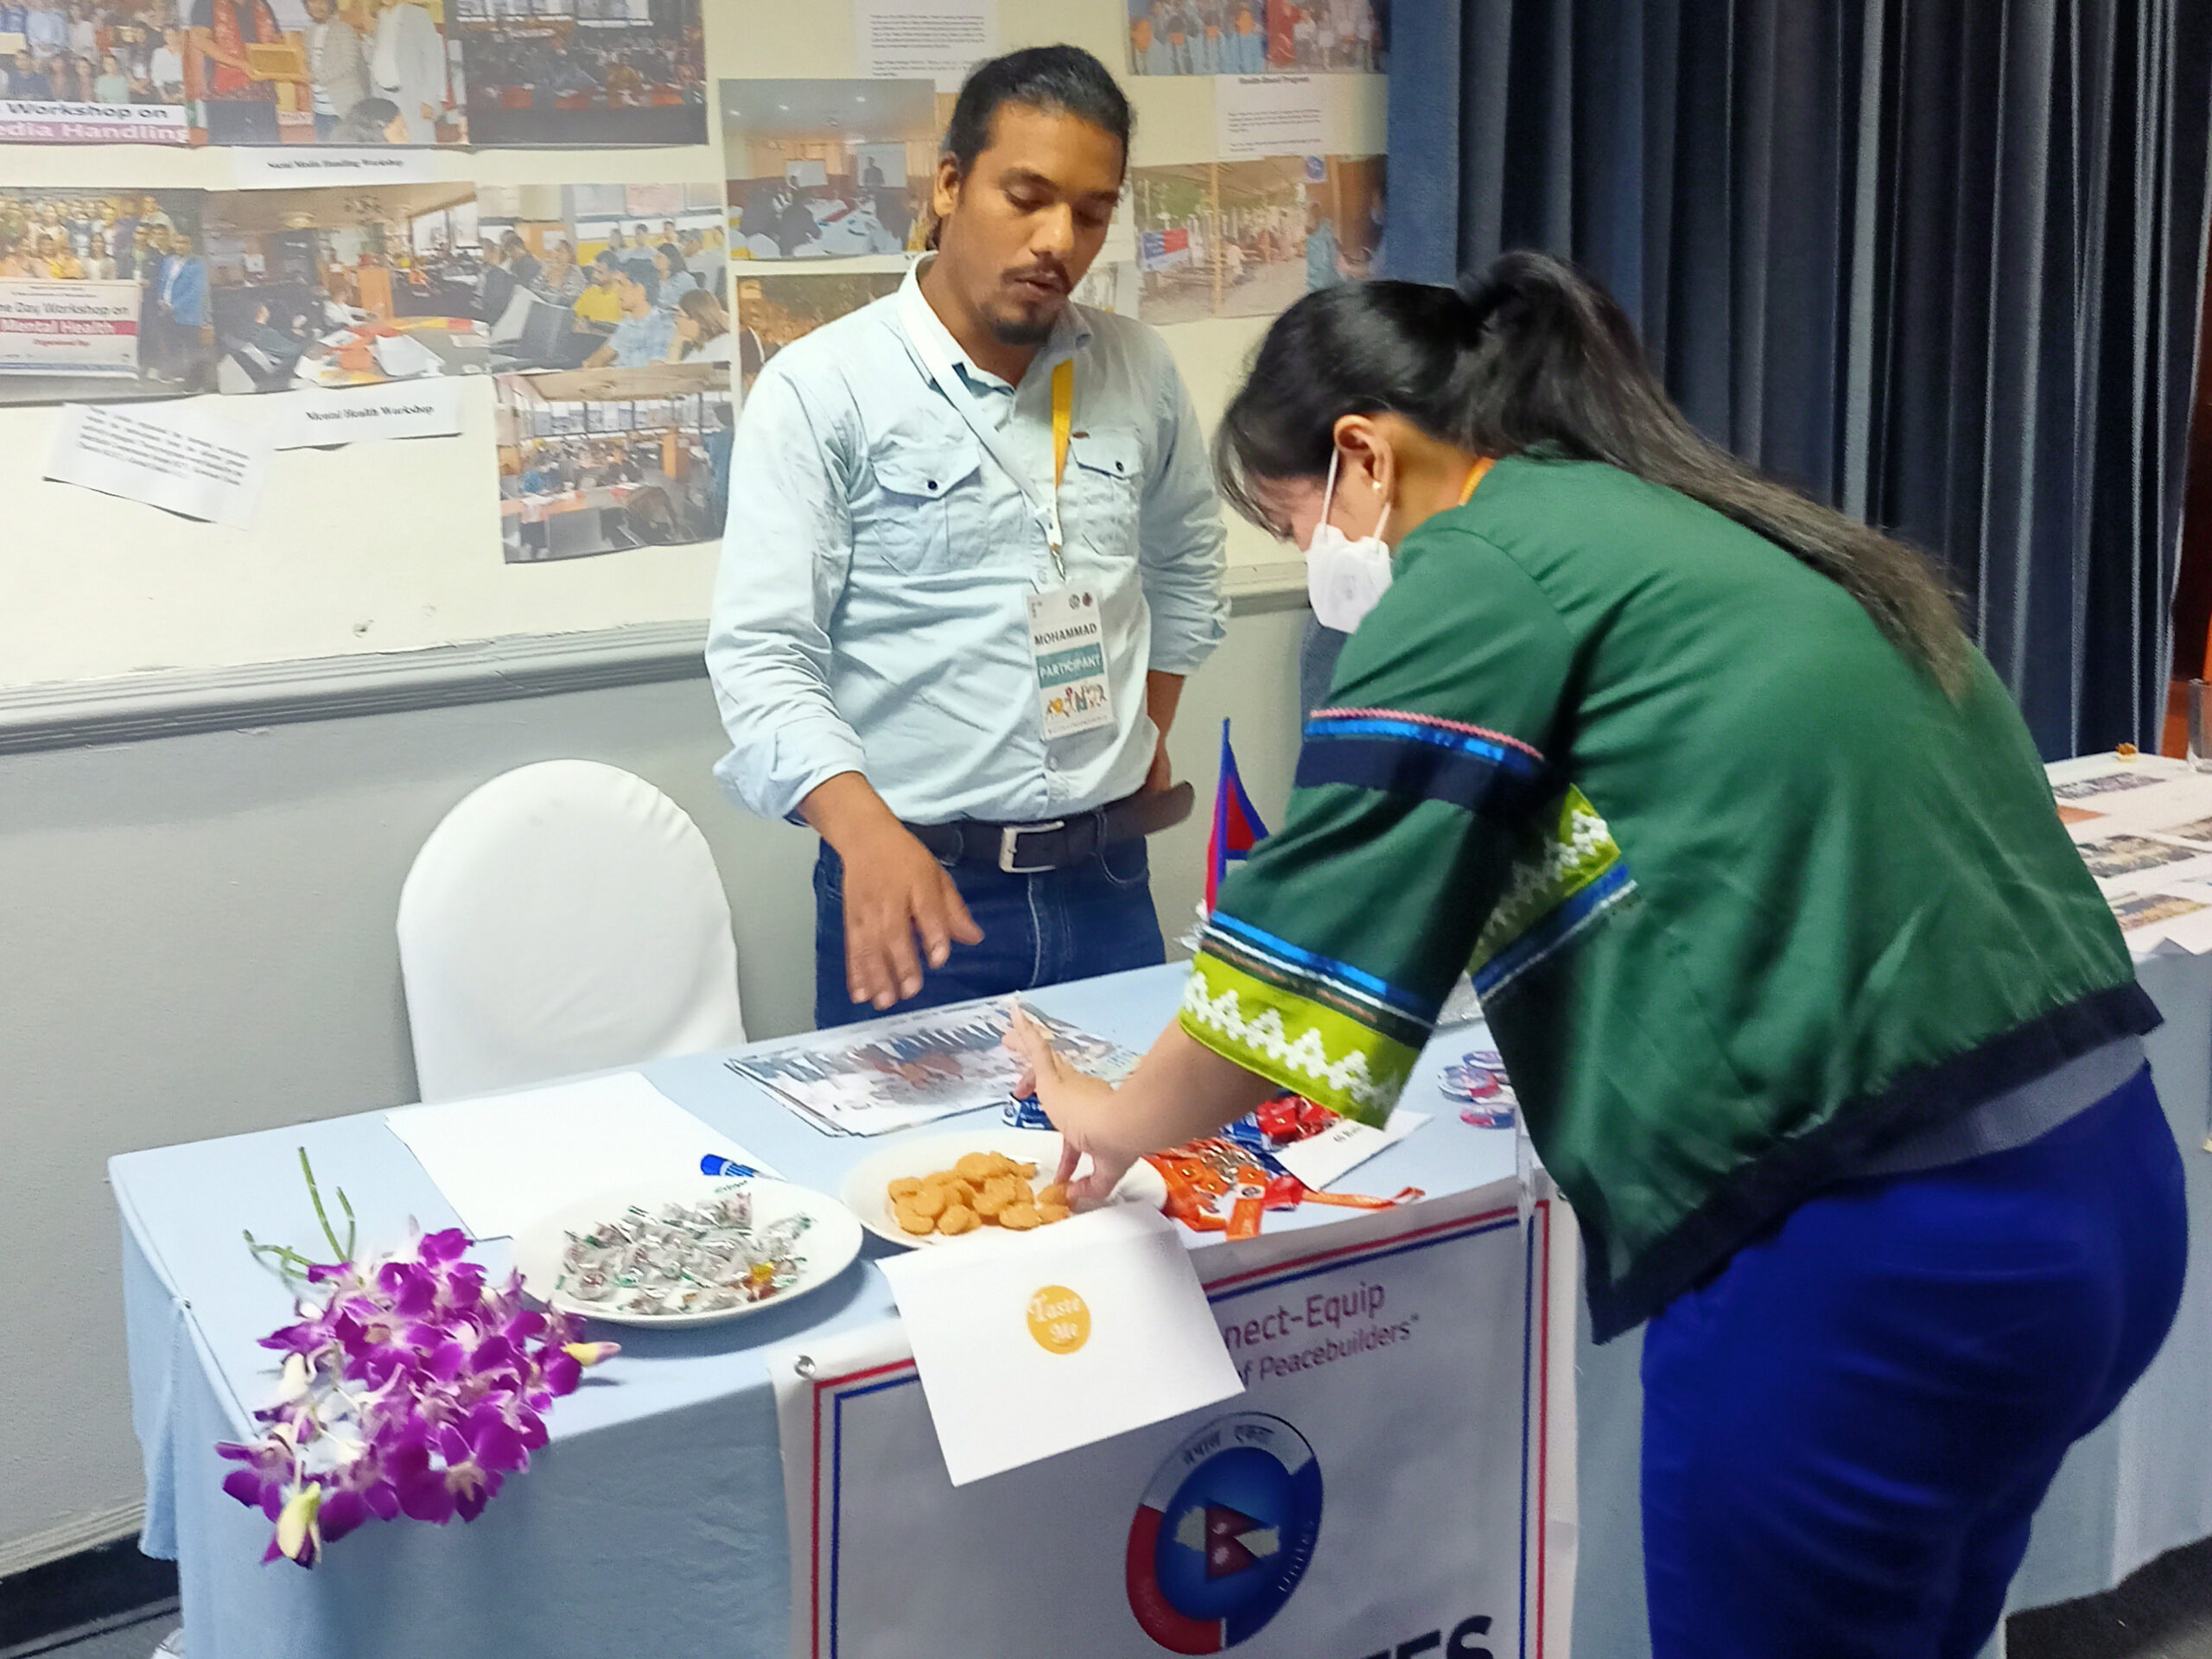 NU booth in the Peace Conference Chiang Mai, Thailand